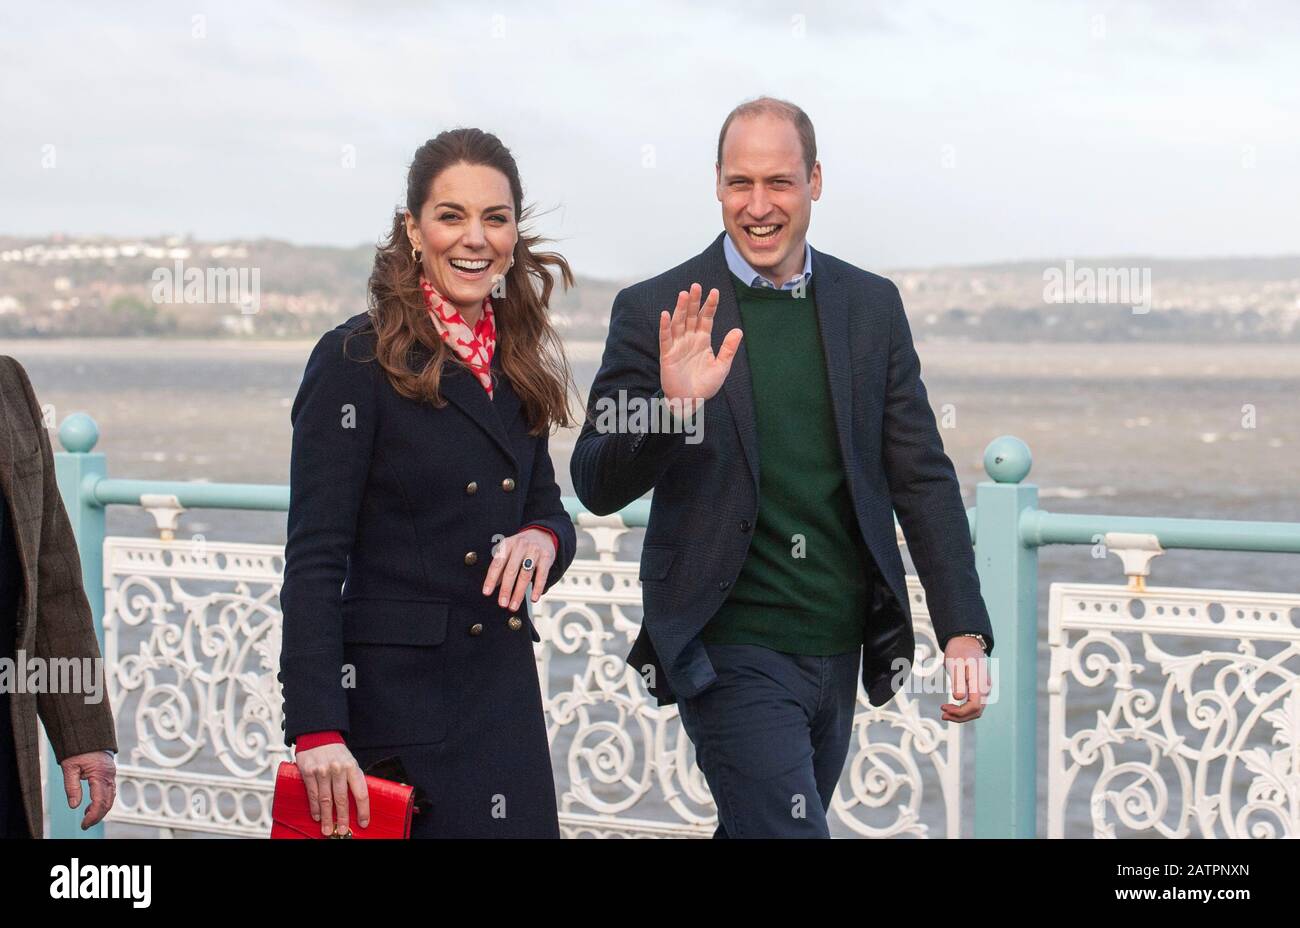 Mumbles Pier - Swansea - Wales - UK - 4th February 2020 Prince William, Duke of Cambridge and Catherine, Duchess of Cambridge visit to the RNLI Lifeboat Station in Mumbles near Swansea today.  Pic by Lisa Dawson Rees Credit: Phil Rees/Alamy Live News Stock Photo